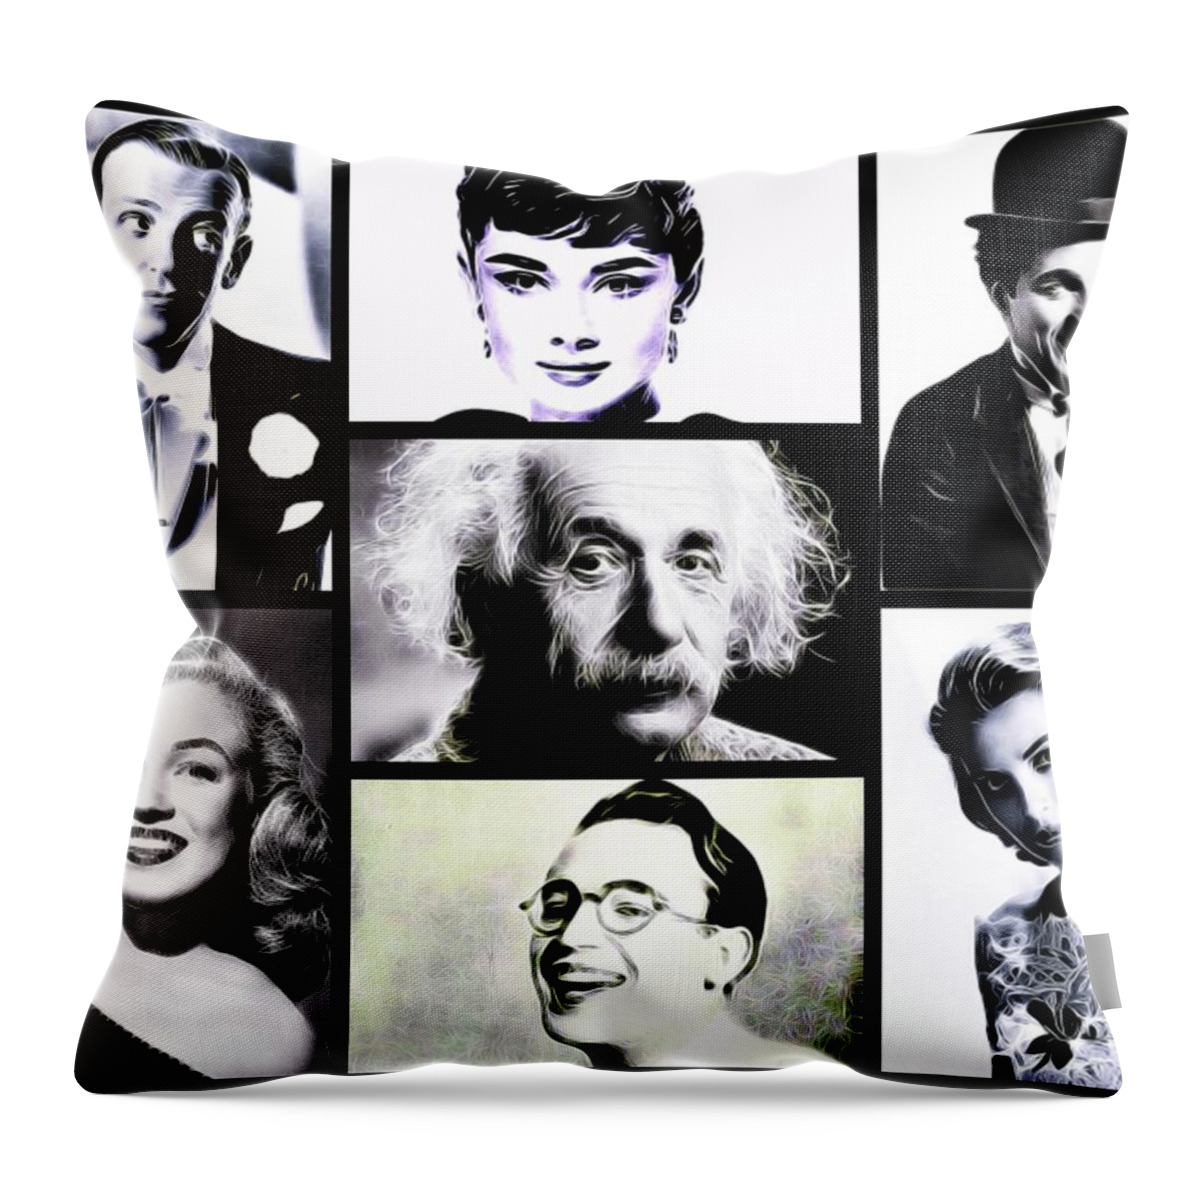 Fred Throw Pillow featuring the digital art Famous Faces by Esoterica Art Agency